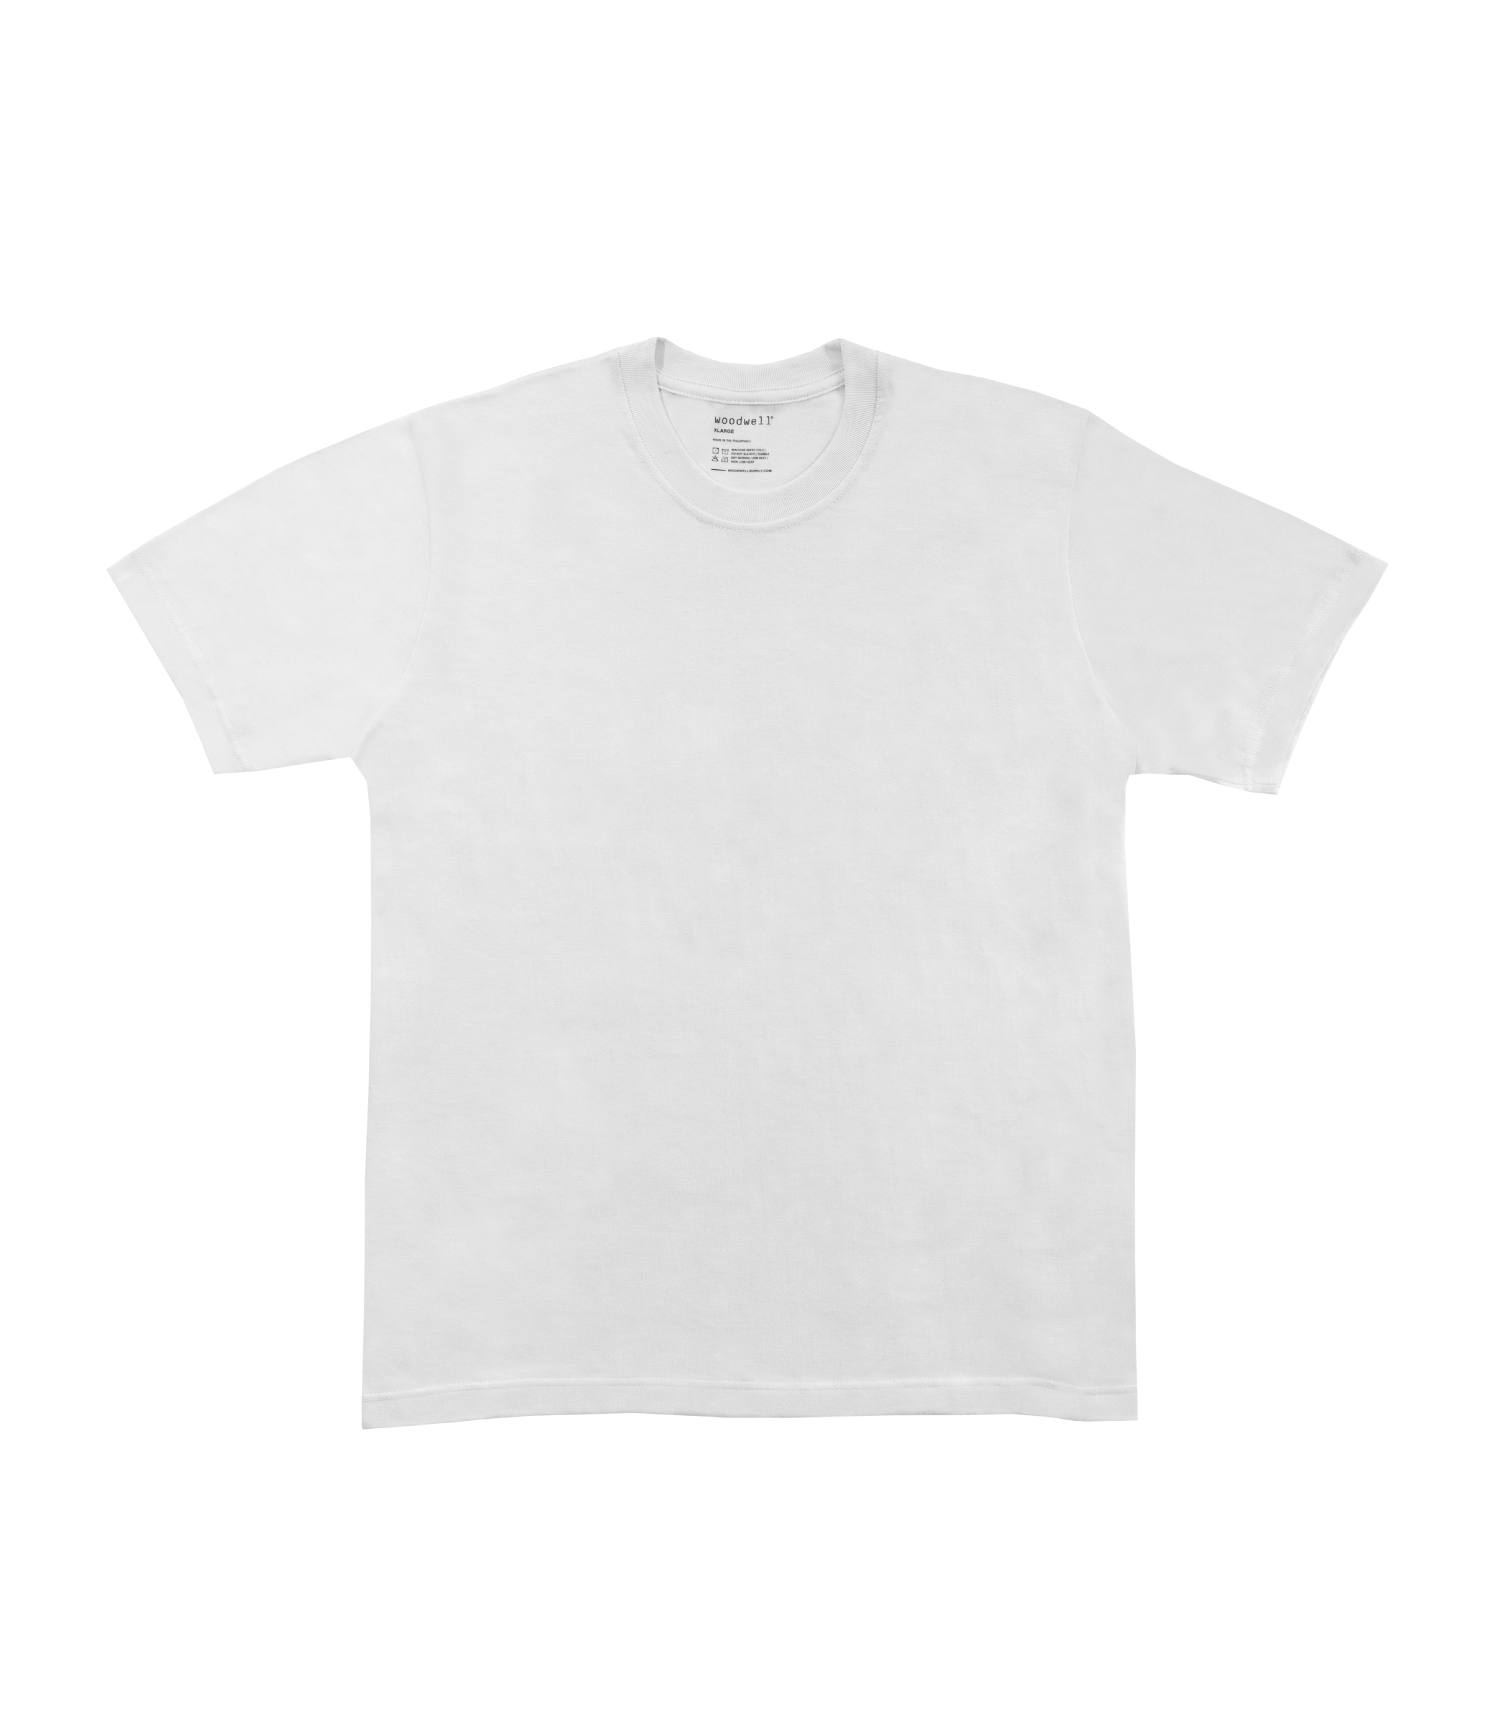 woodwell® Skyline T-Shirt (Classic Fit)